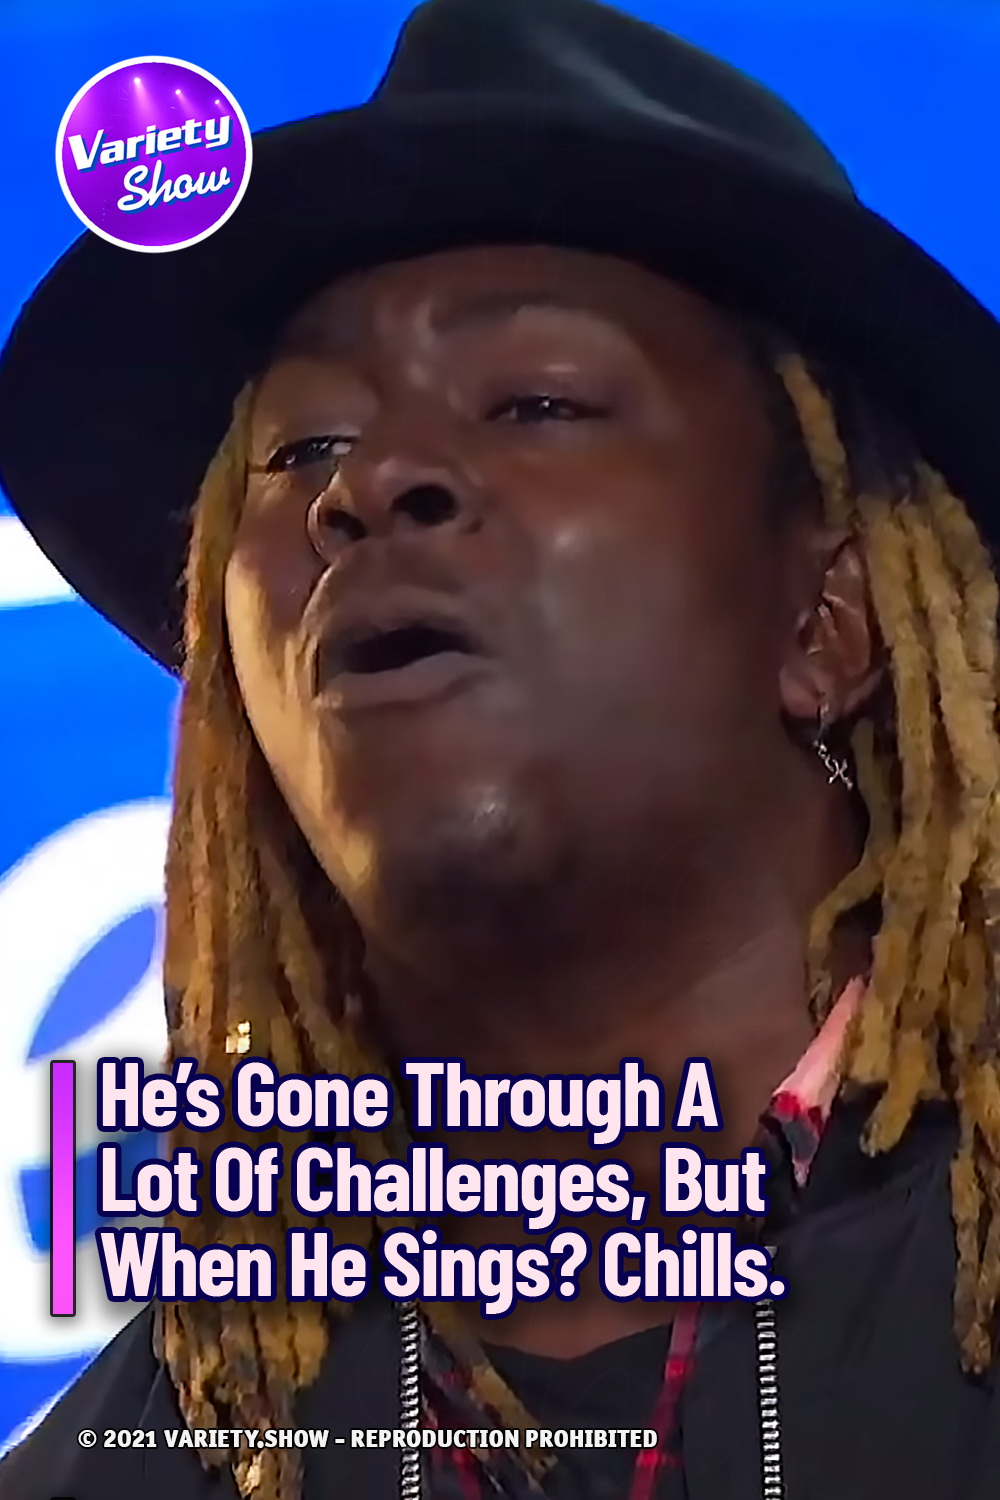 He’s Gone Through A Lot Of Challenges, But When He Sings? Chills.